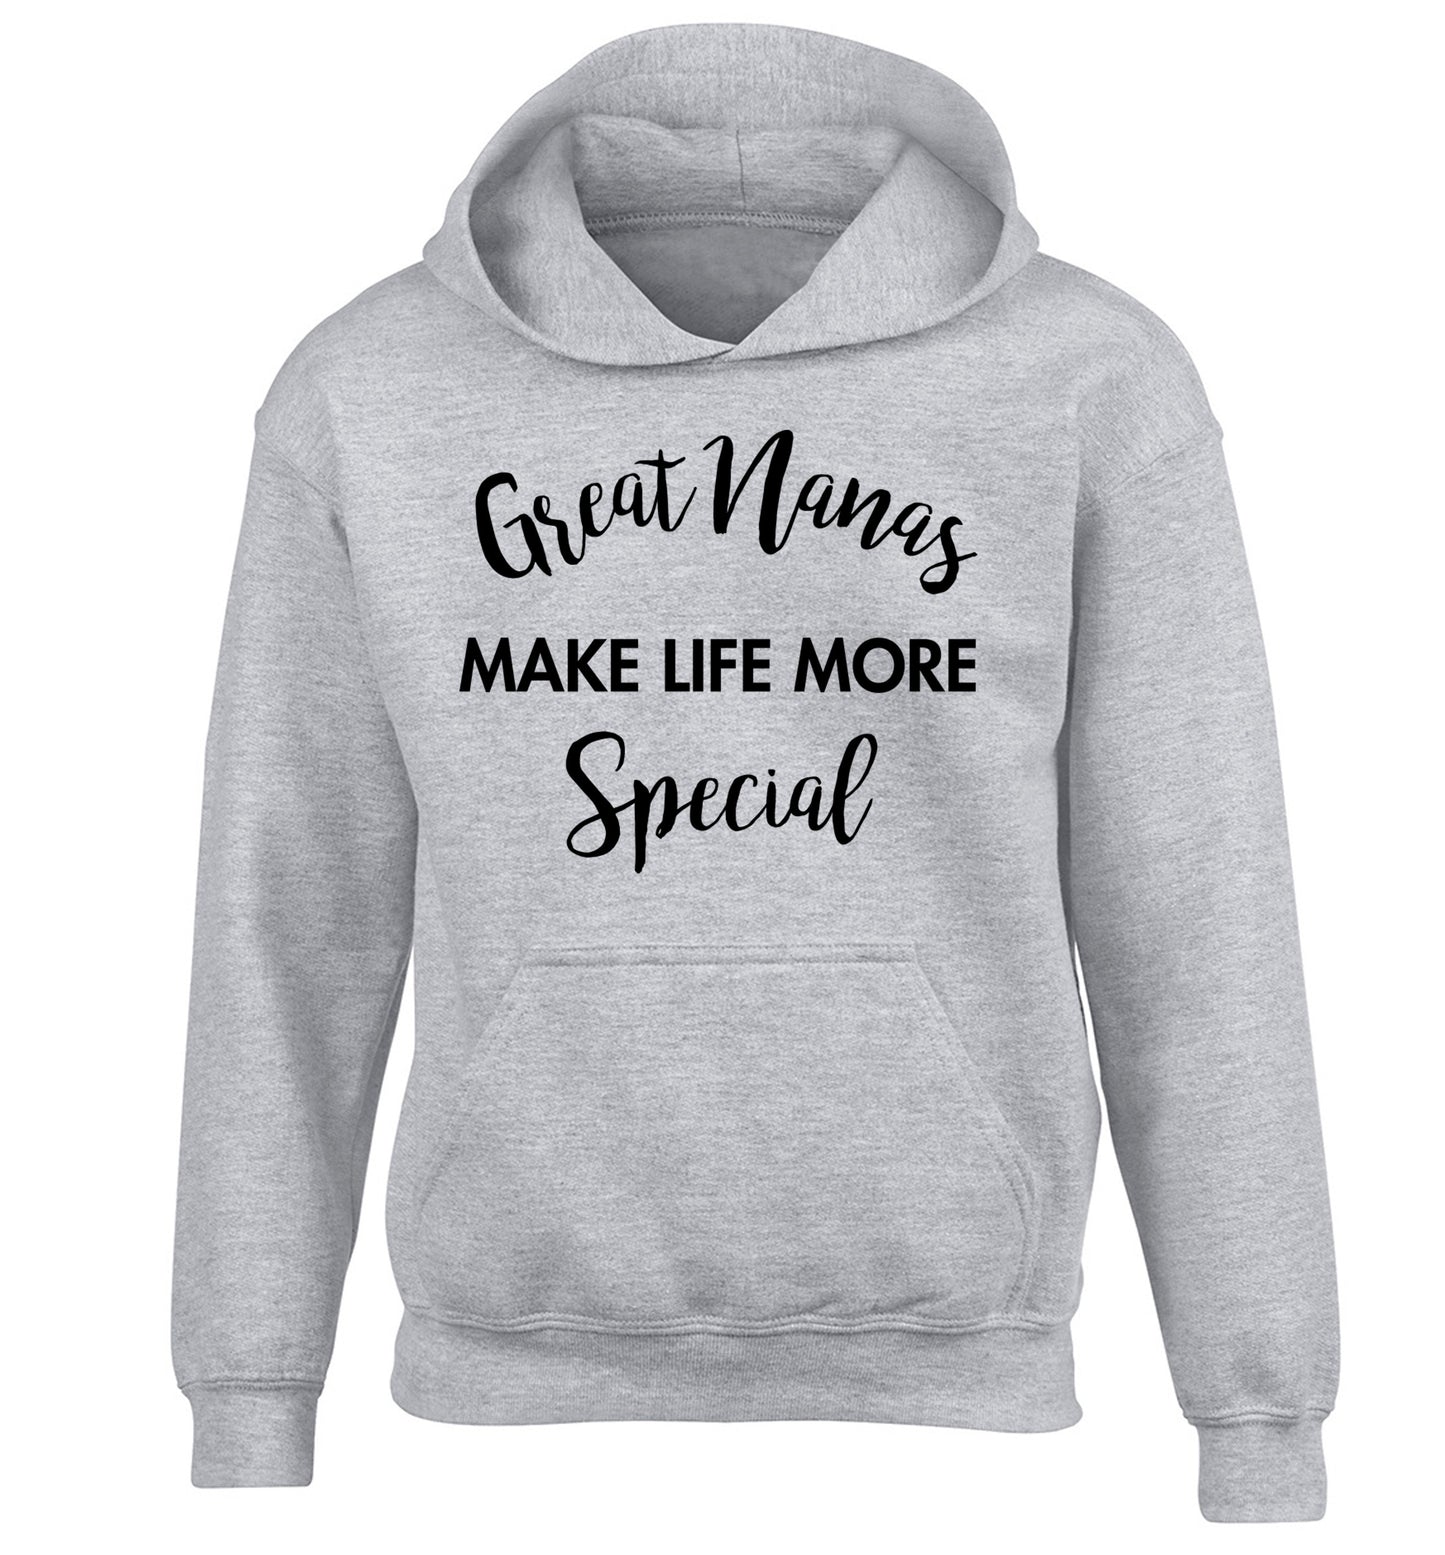 Great nanas make life more special children's grey hoodie 12-14 Years